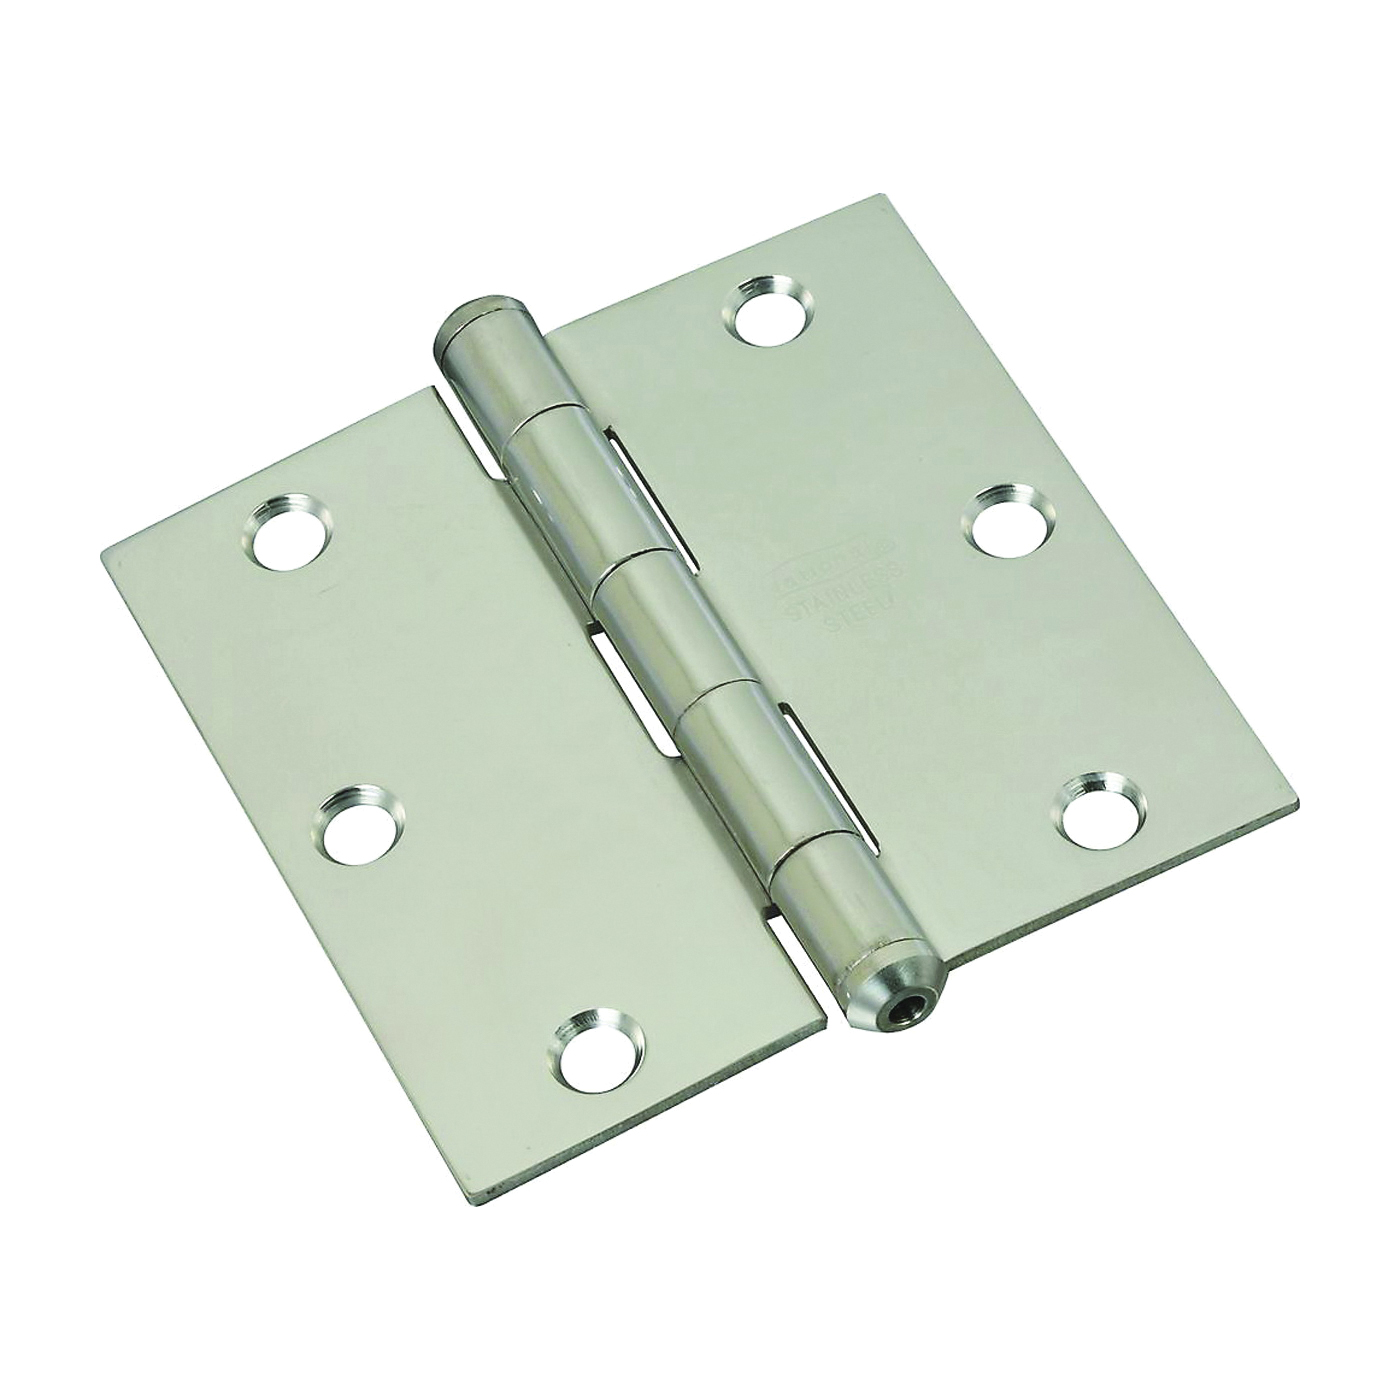 N830-275 Door Hinge, Stainless Steel, Zinc, Non-Rising, Removable Pin, Full-Mortise Mounting, 50 lb